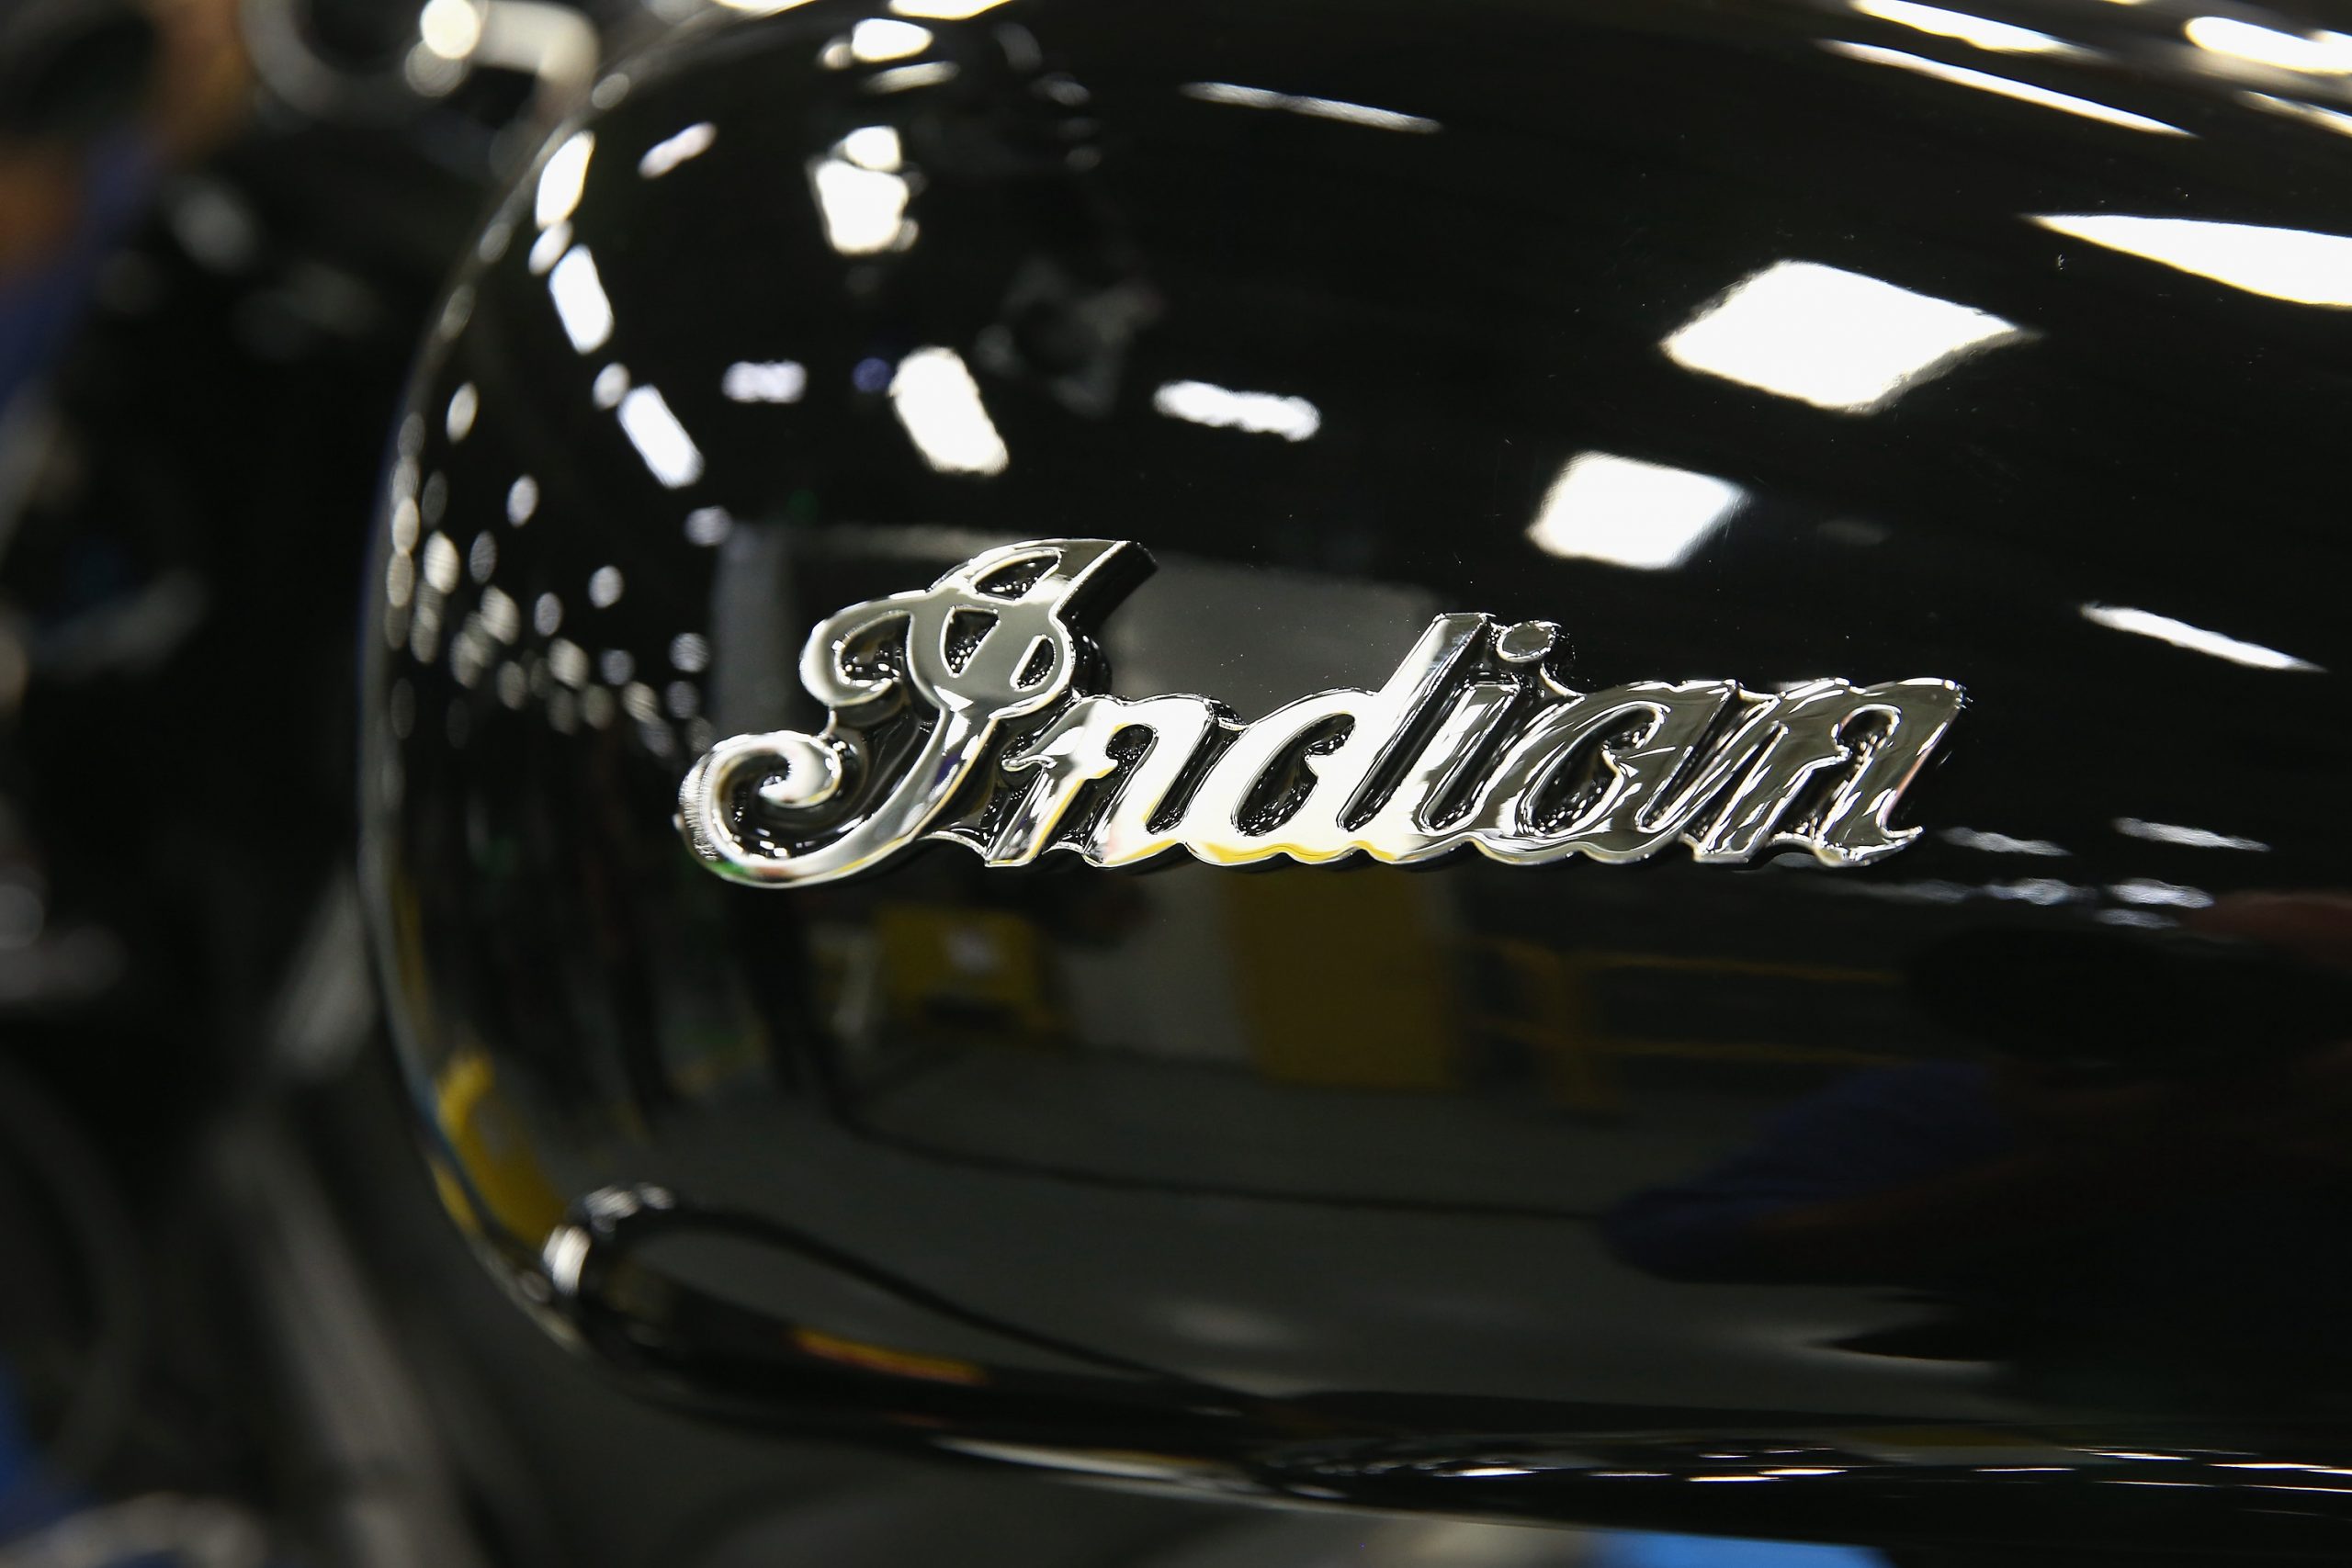 An Indian logo decorates the gas tank of an Indian Chief Vintage motorcycle sitting